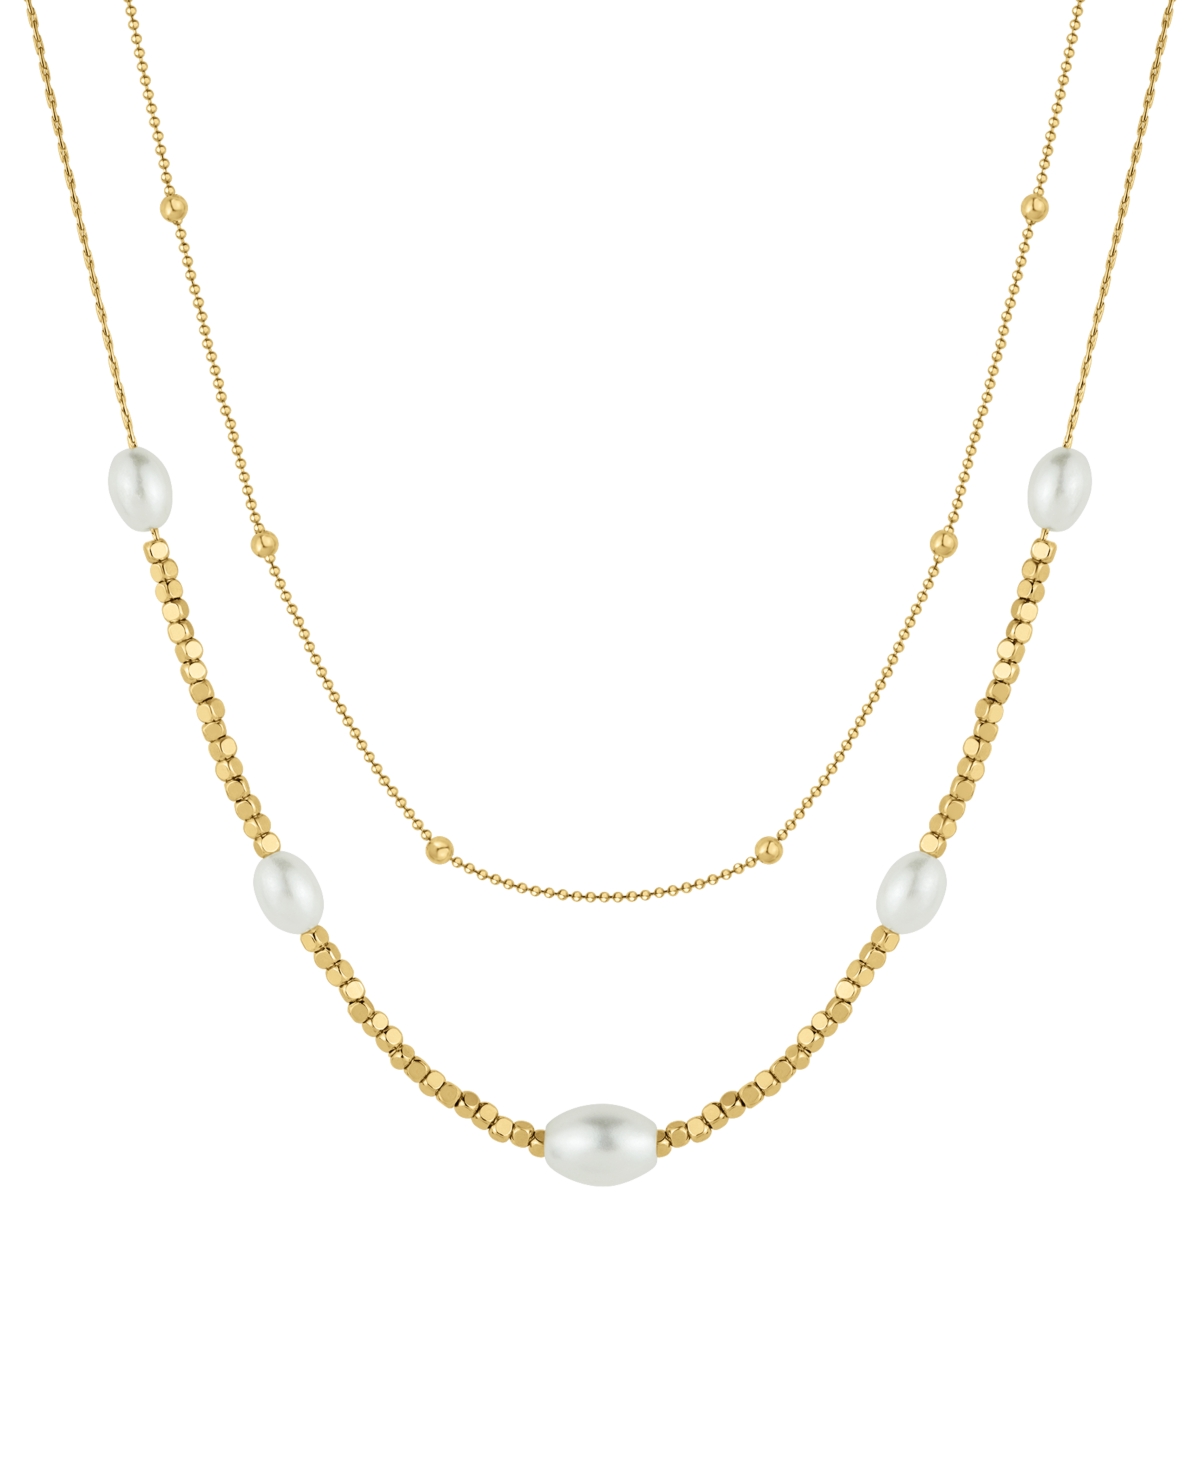 Imitation Pearl 18K Gold-Plated Double Layer Necklace - Gold